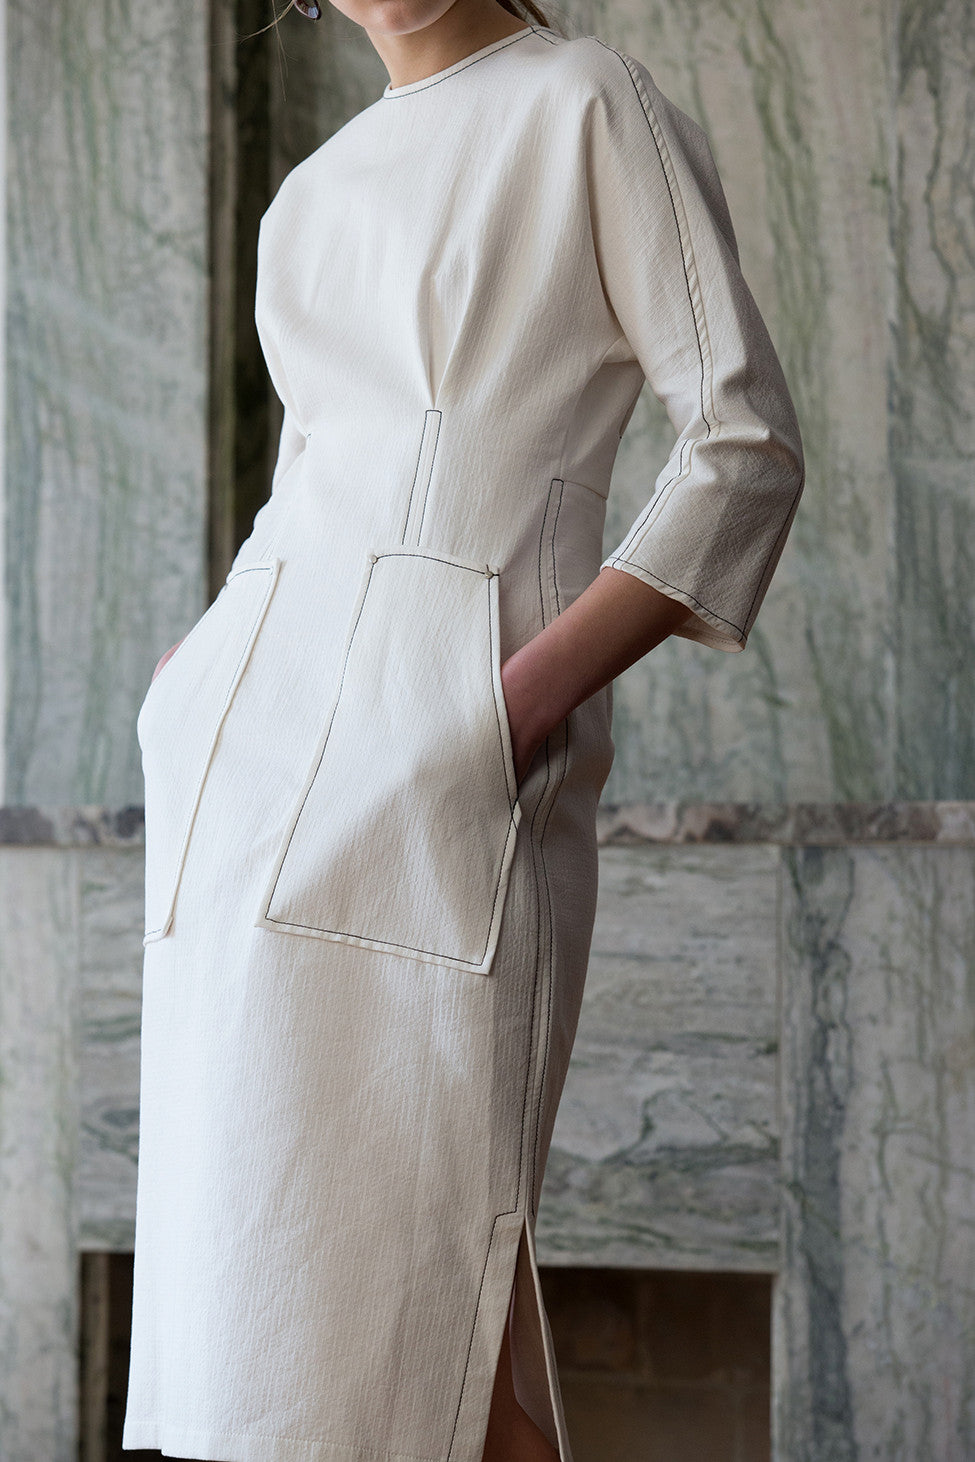 The Kaveh Dress in White, featuring three-quarter sleeves with stitching details, ruched at waist, two slant pockets. Concealed zip fastening at the back. Fitted at waist. Side slits.